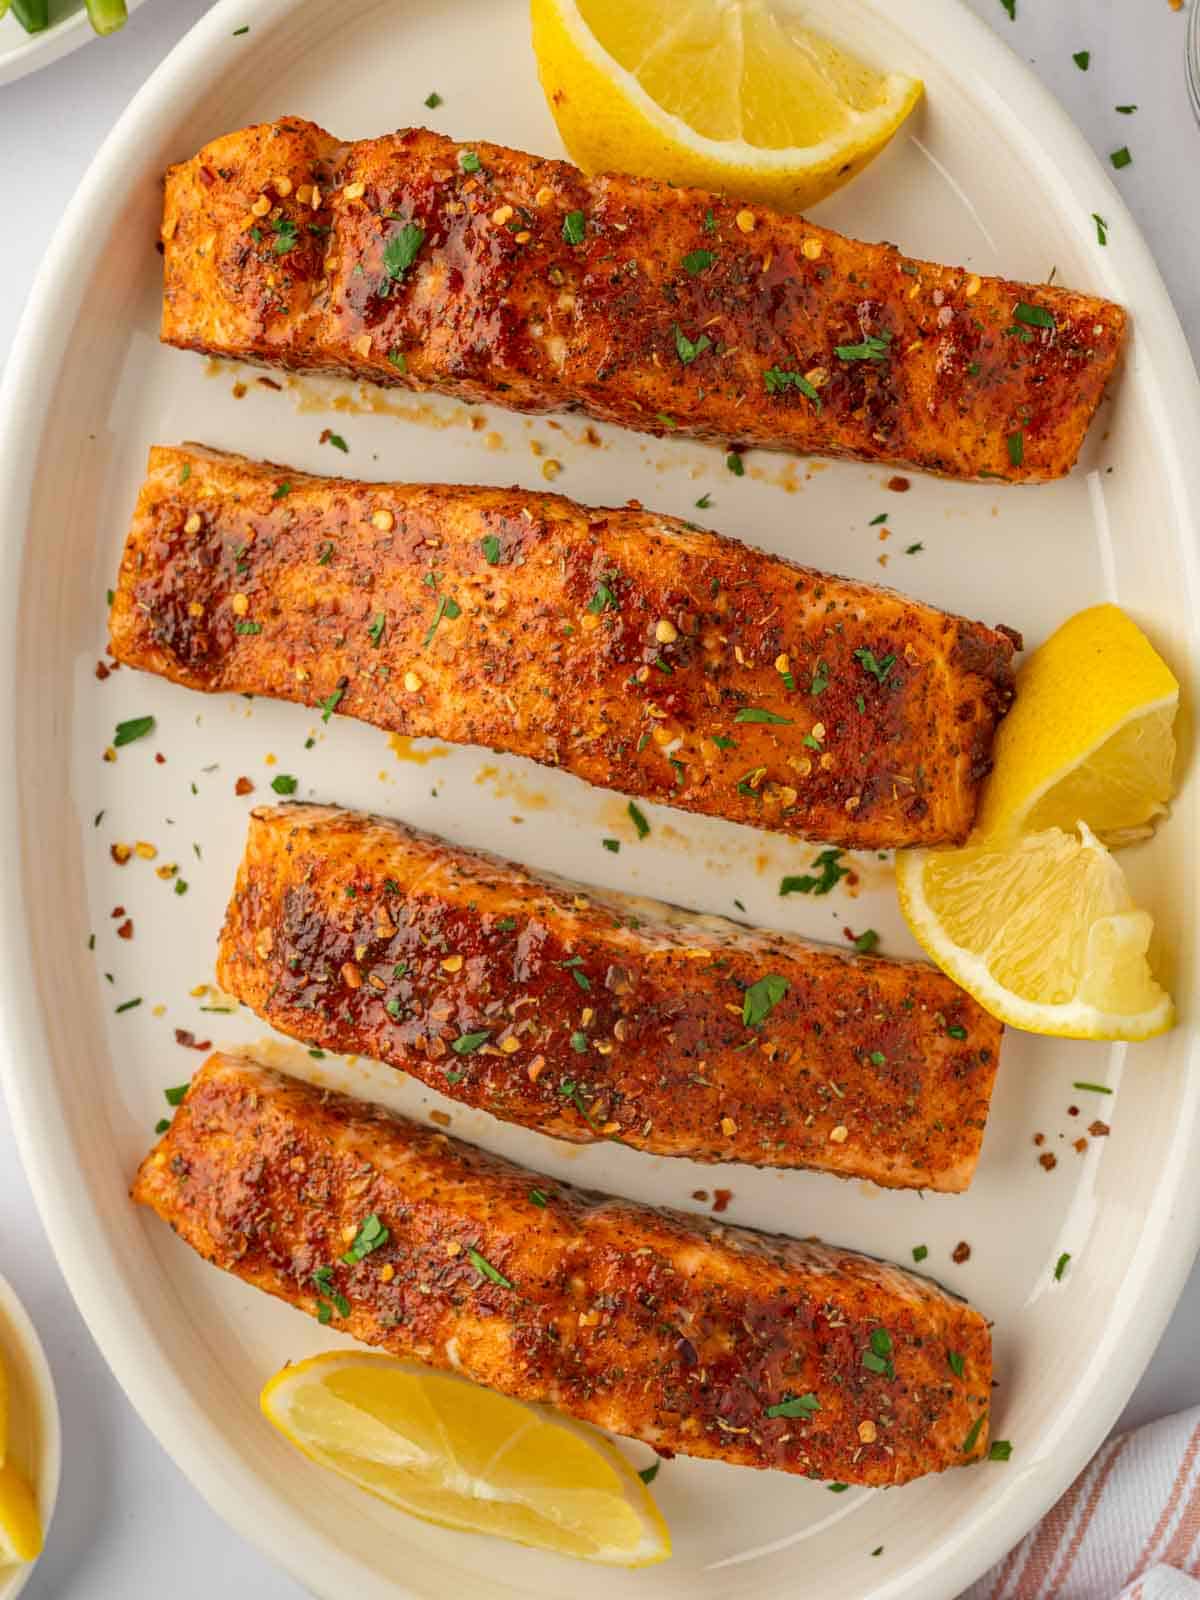 A tray of salmon baked with brown sugar.